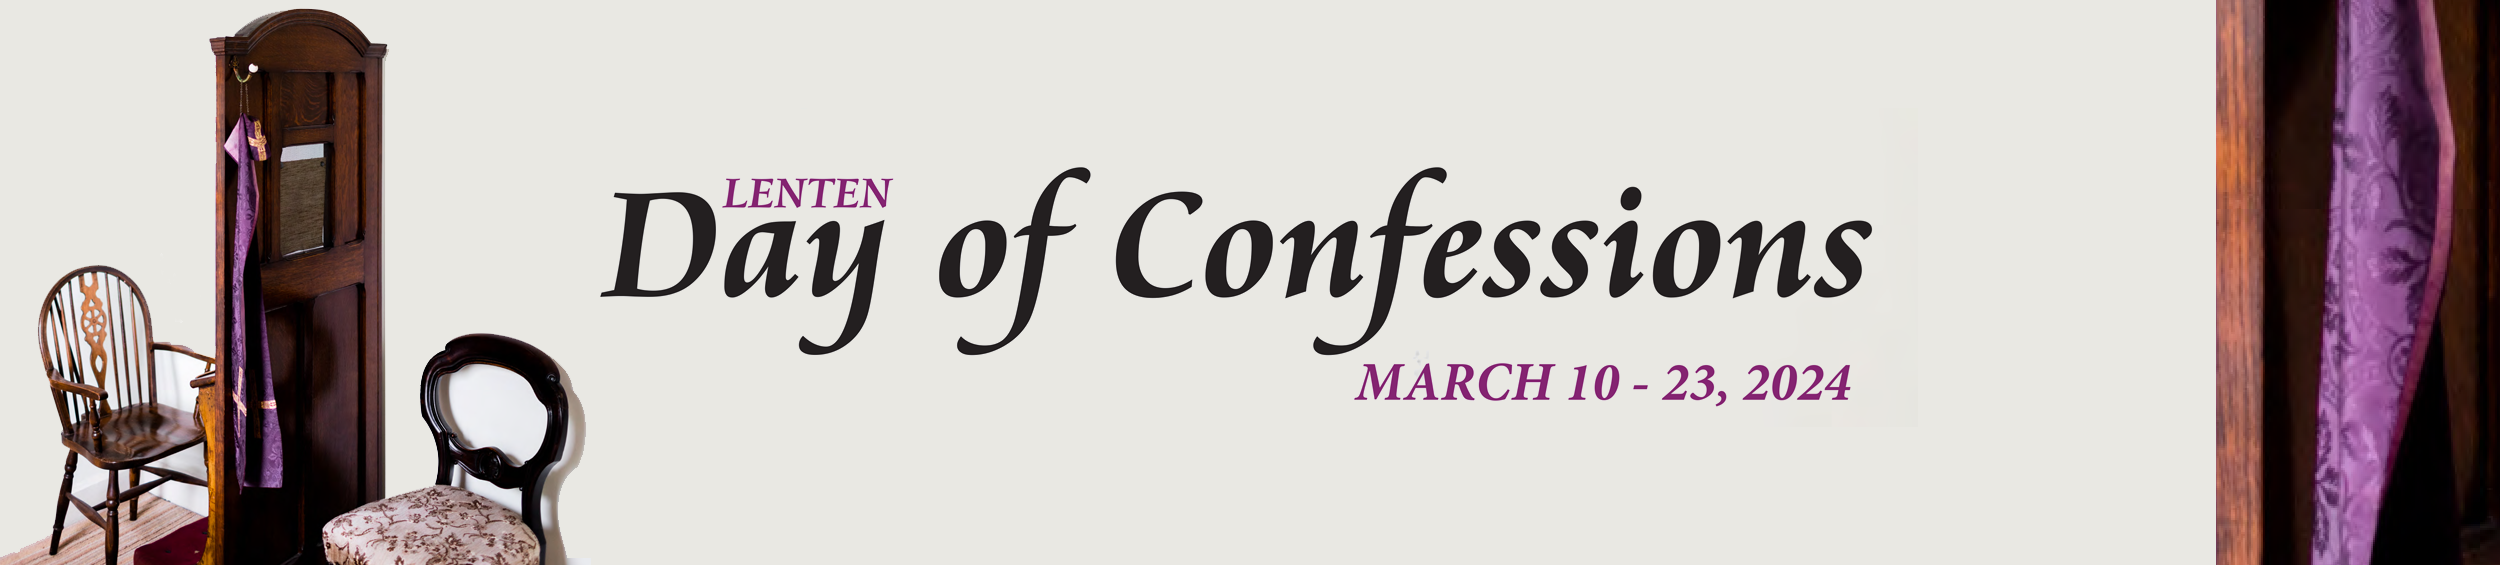 Lenten Day of Confessions 2024